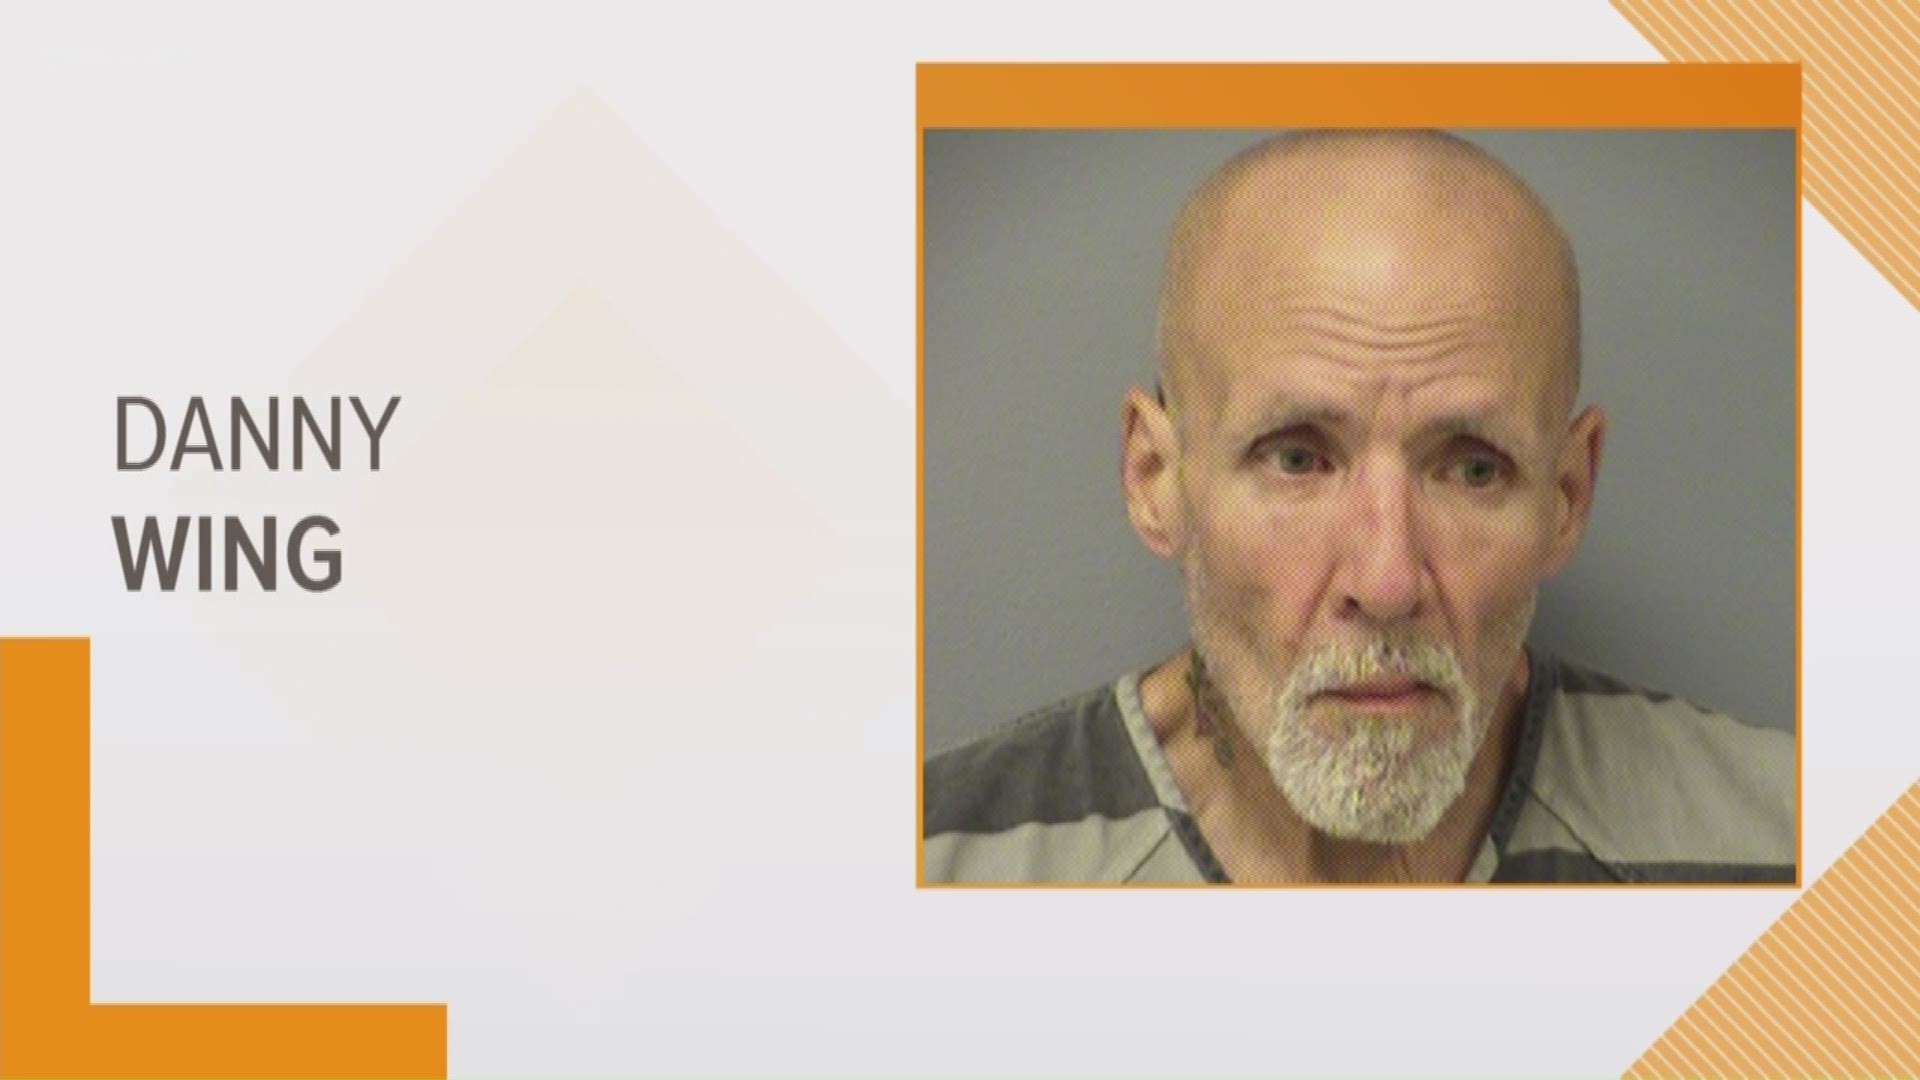 A 61-year-old man is in custody after Austin police say he shot and killed someone at a homeless camp.